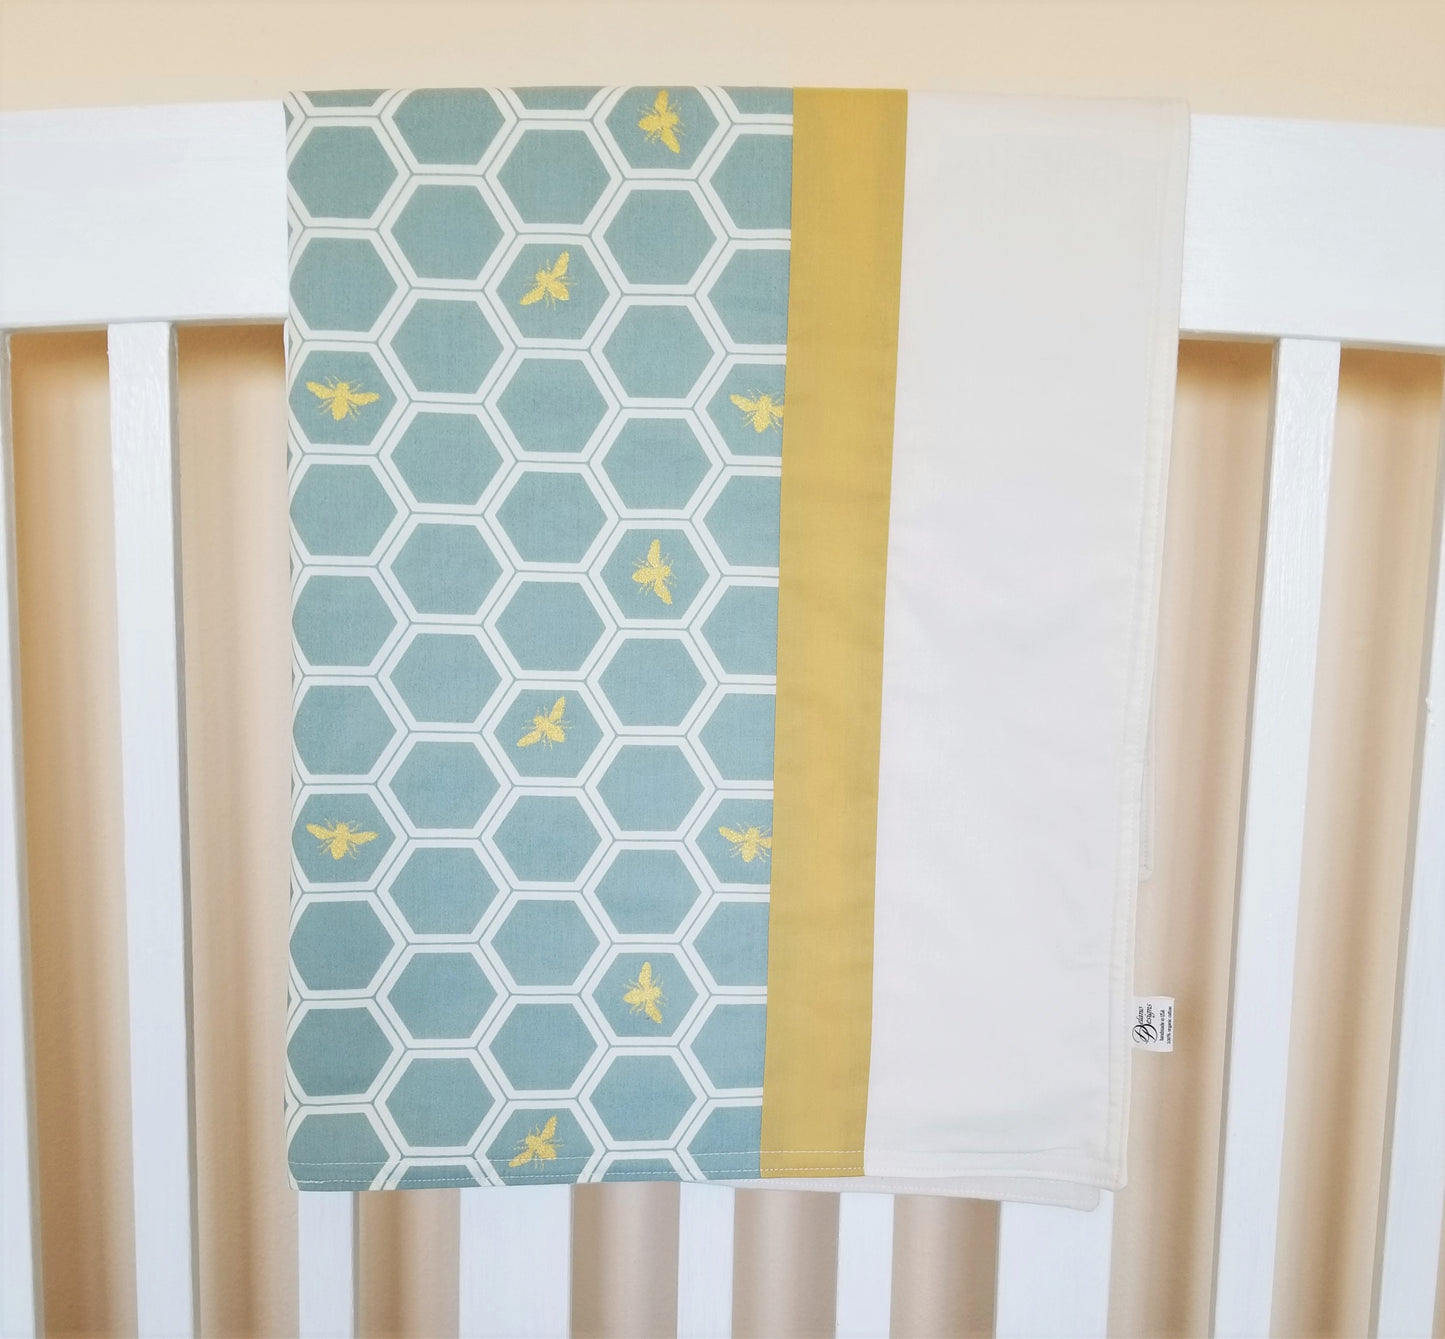 Organic Cotton Baby and Toddler Blankets in Honeycomb and Bee Print